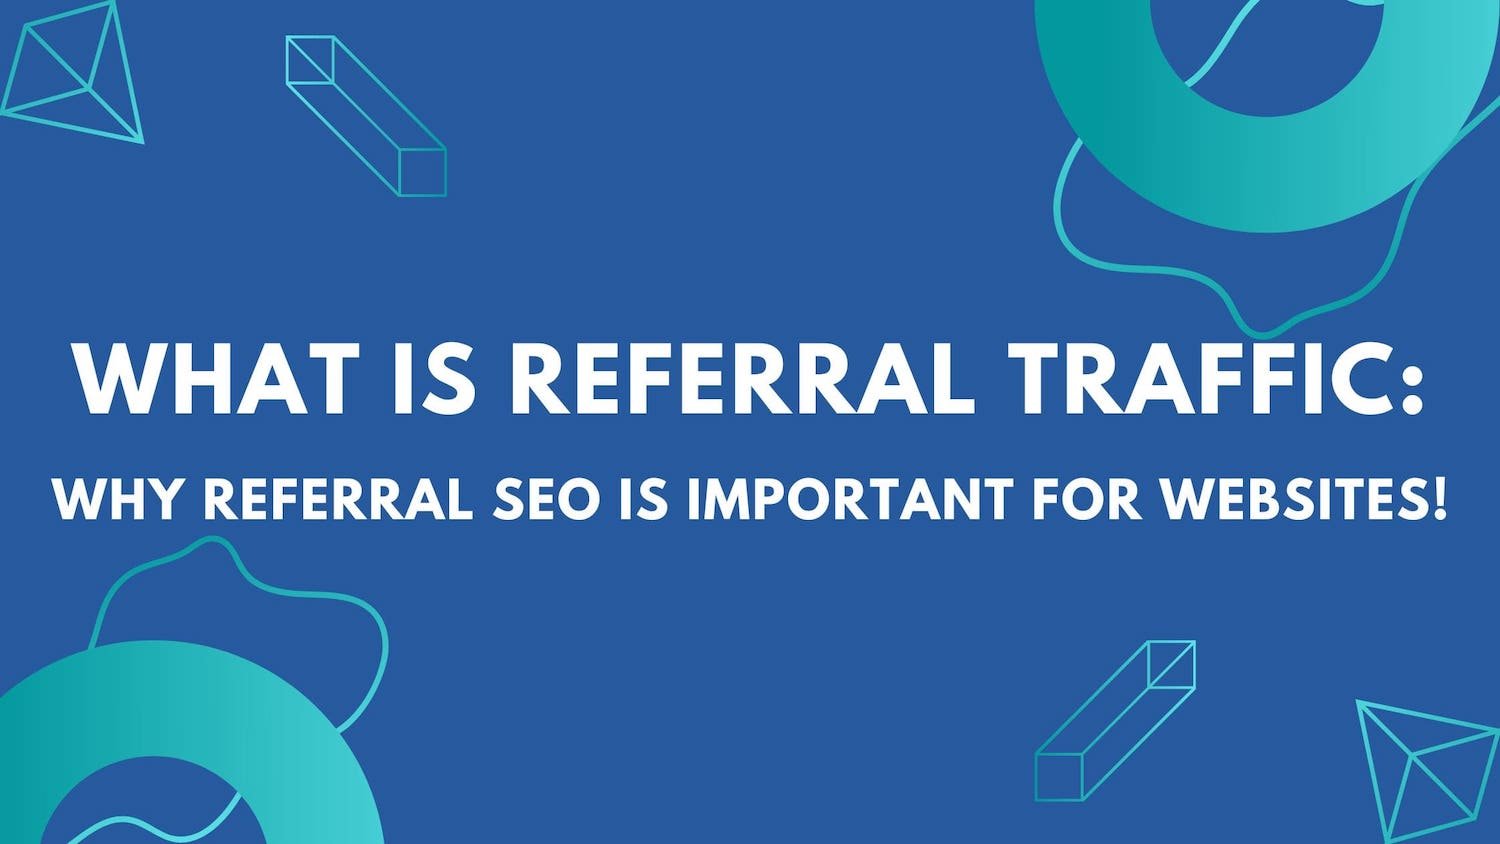 What is referral traffic - Why referral SEO is important for websites